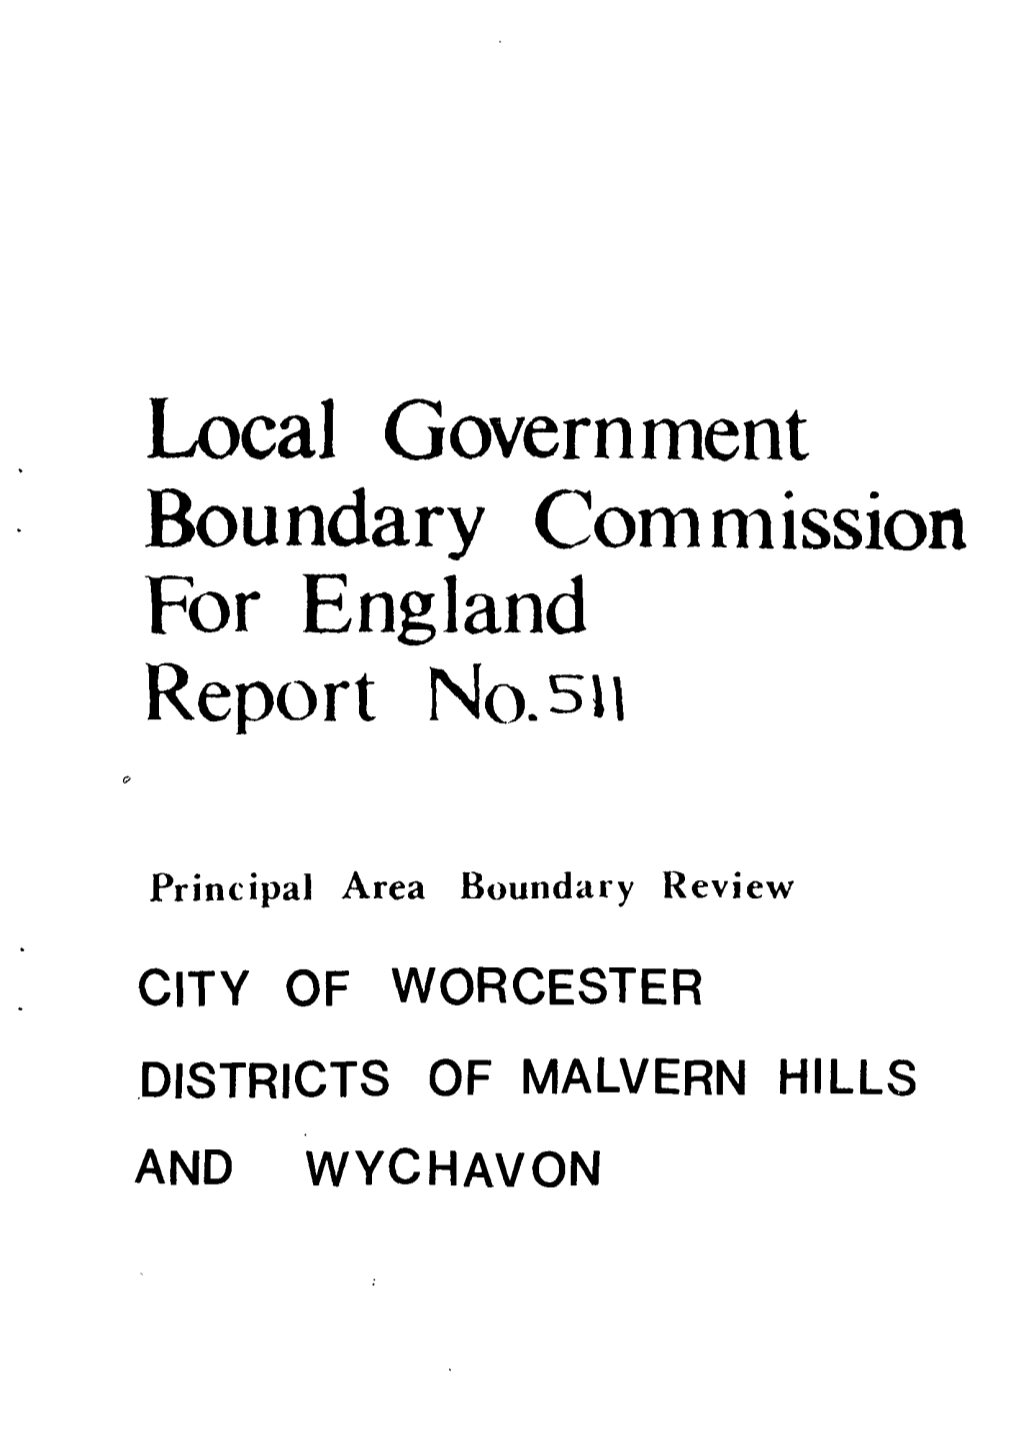 Local Government Boundary Commission for England Report No.5Ii